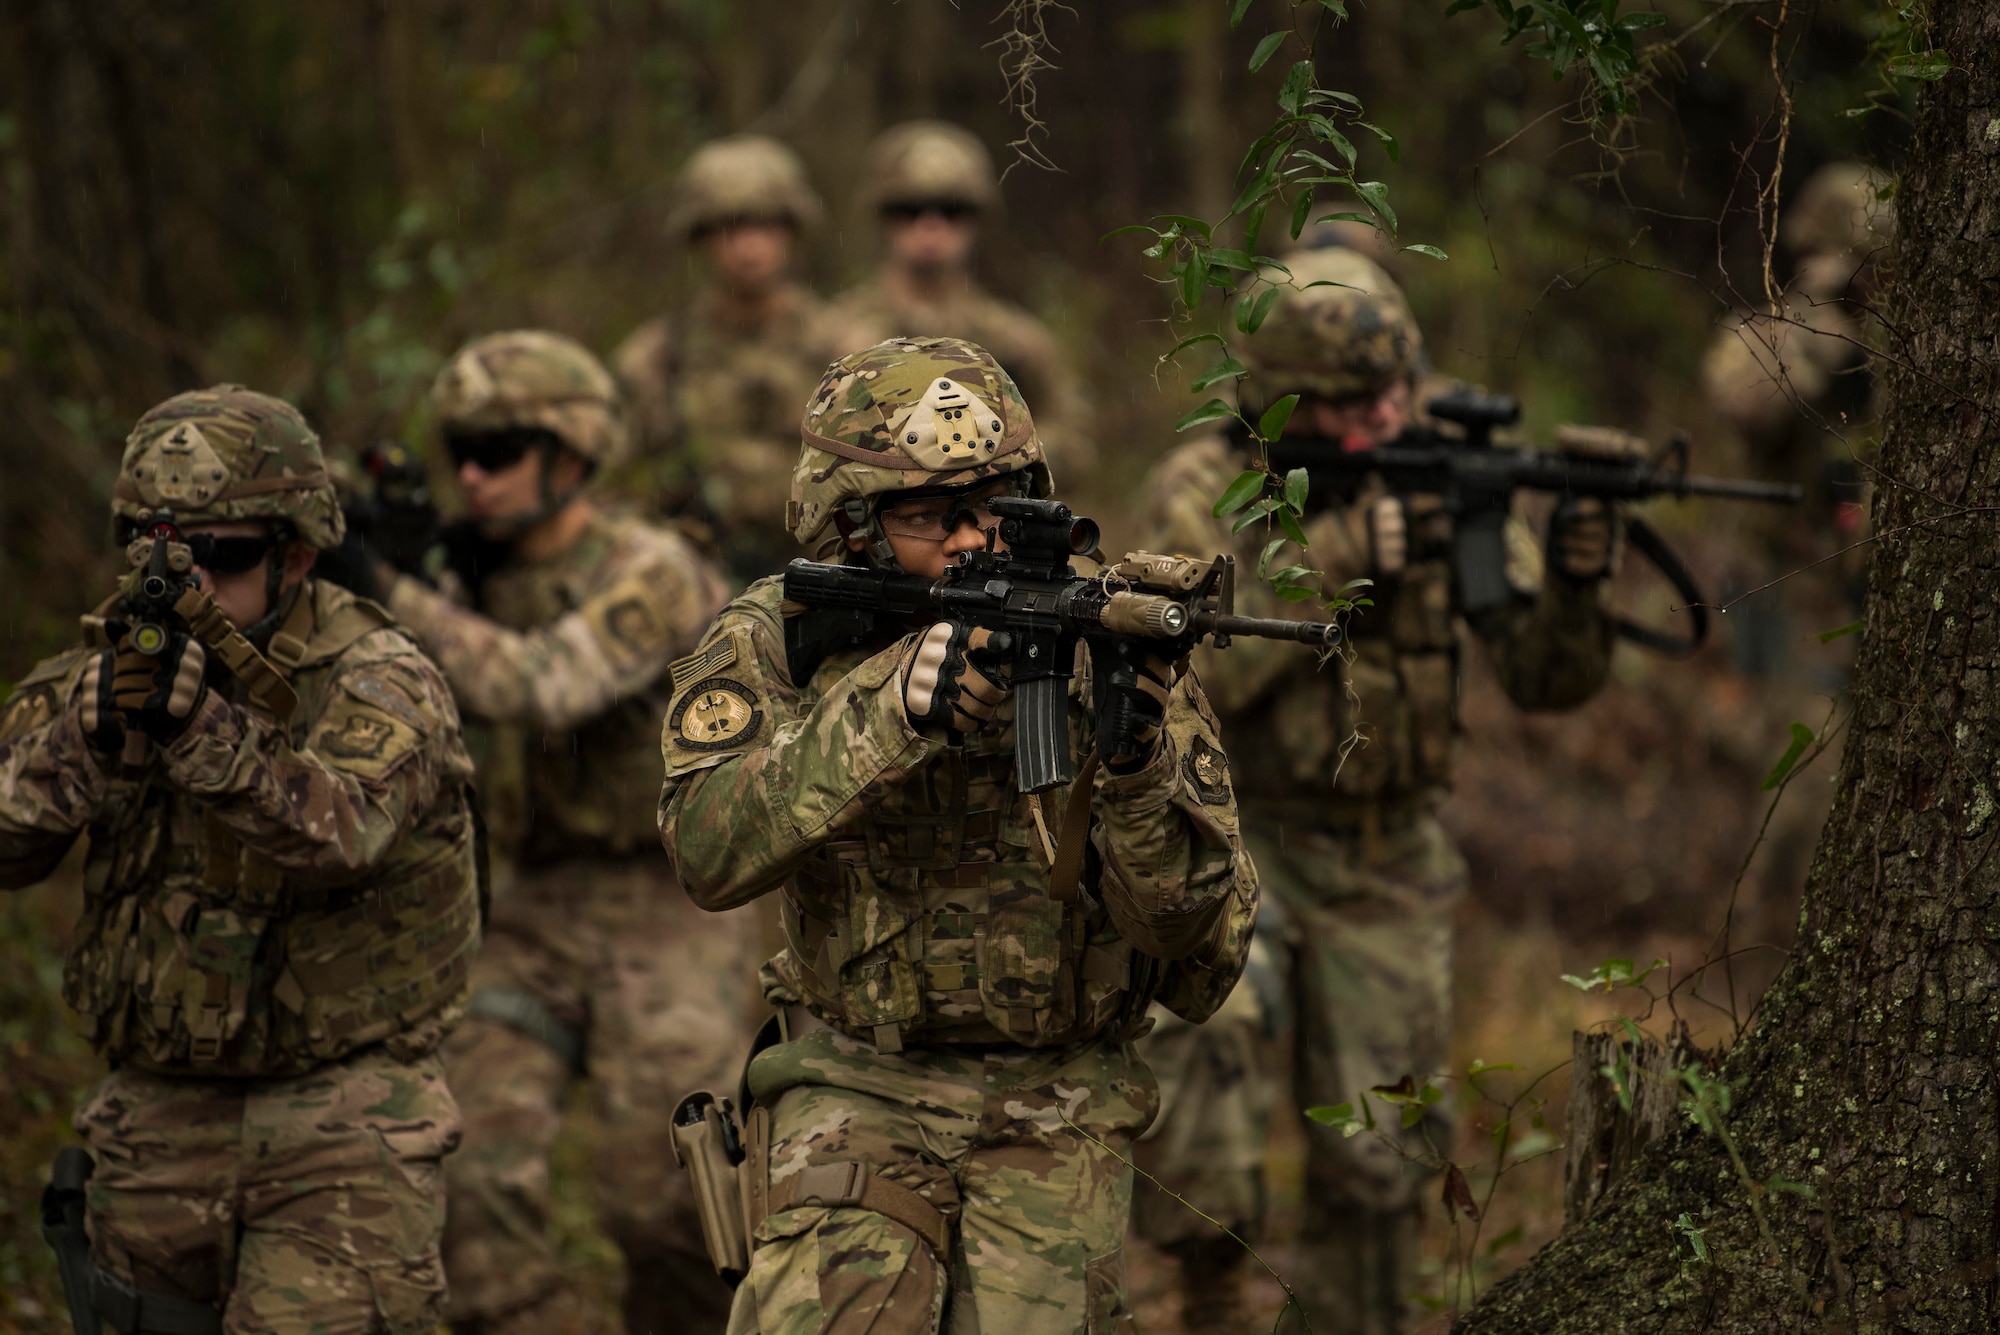 Members of the 823rd Base Defense Squadron move in formation while looking for enemy forces during a training scenario, Moody Air Force Base, Jan. 12, 2018. The 823rd is one of three operational security forces squadrons under the 820th Base Defense Group whose mission is to provide high-risk force protection and integrated base defense for expeditionary forces. (U.S. Air Force photo by Bennie J. Davis III)